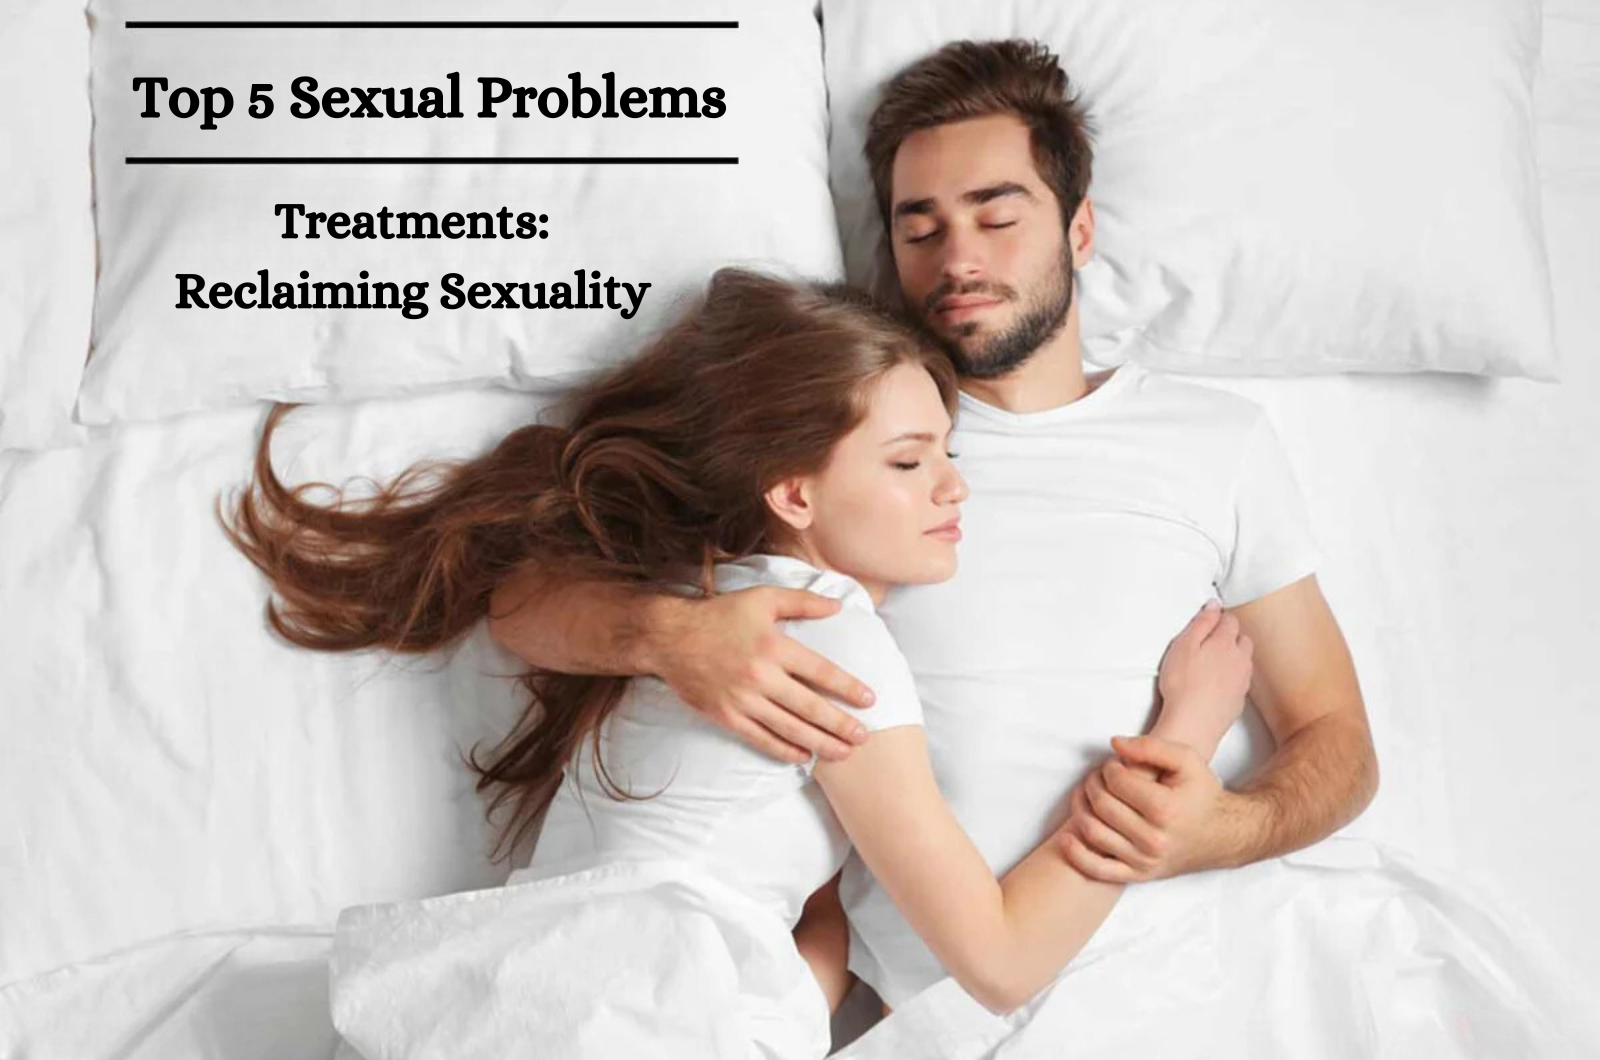 Top 5 Sexual Problems Treatments: Reclaiming Sexuality